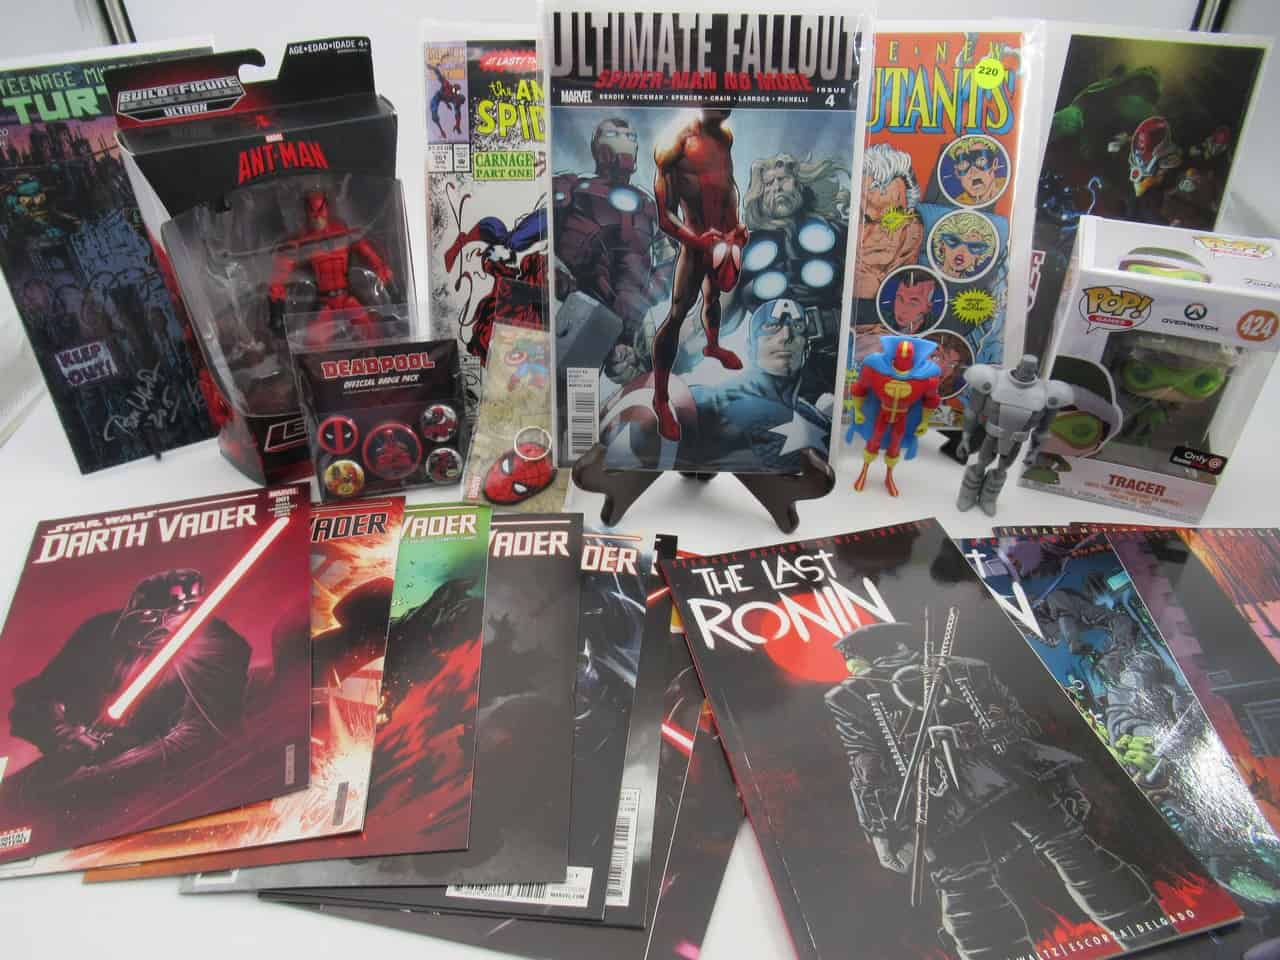 Toys and comics coming to auction January 4!